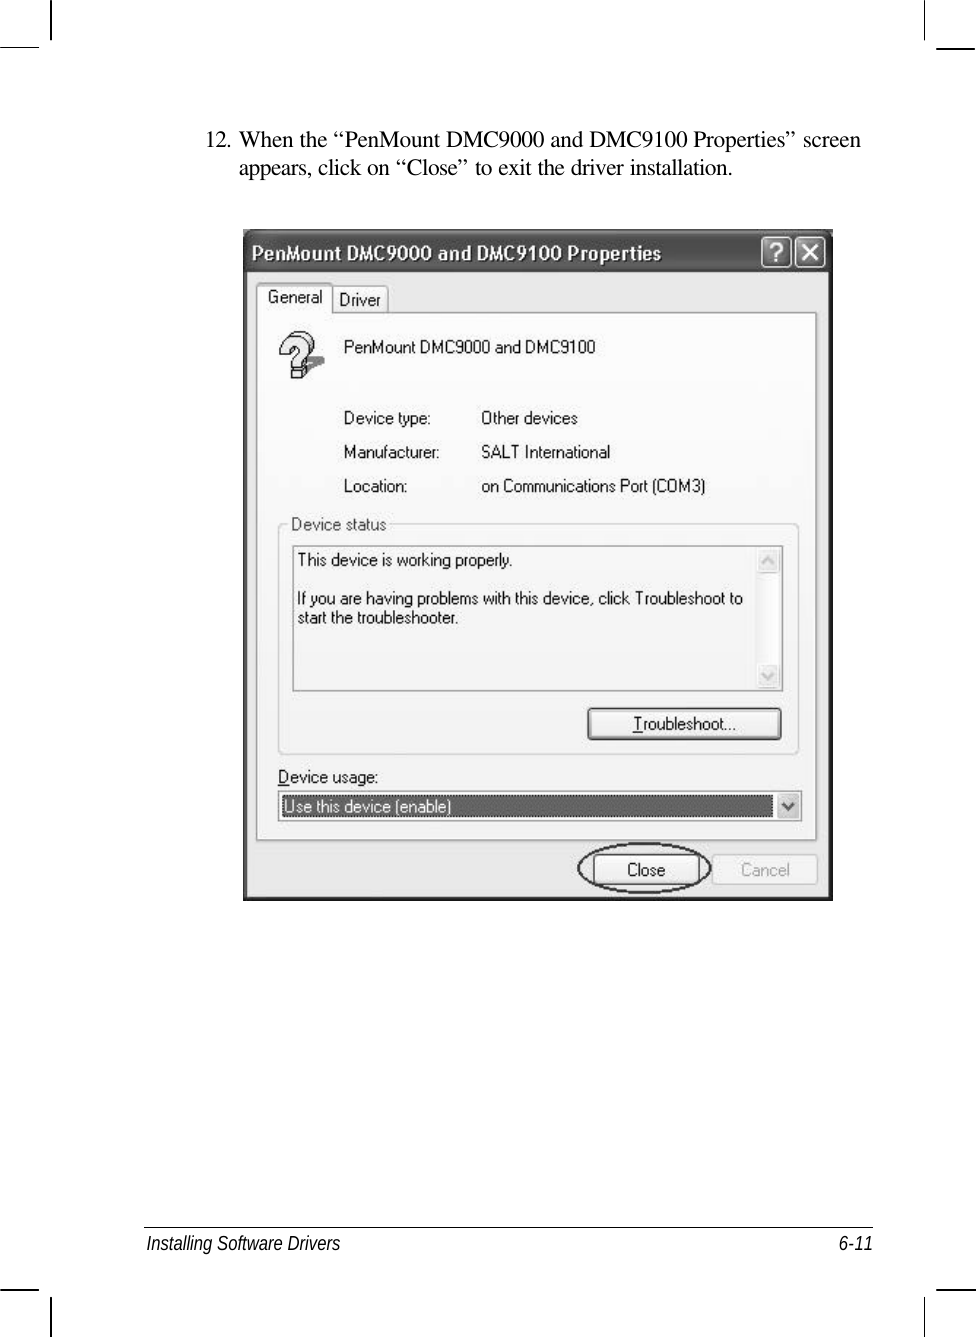  Installing Software Drivers 6-11 12. When the “PenMount DMC9000 and DMC9100 Properties” screen appears, click on “Close” to exit the driver installation.   